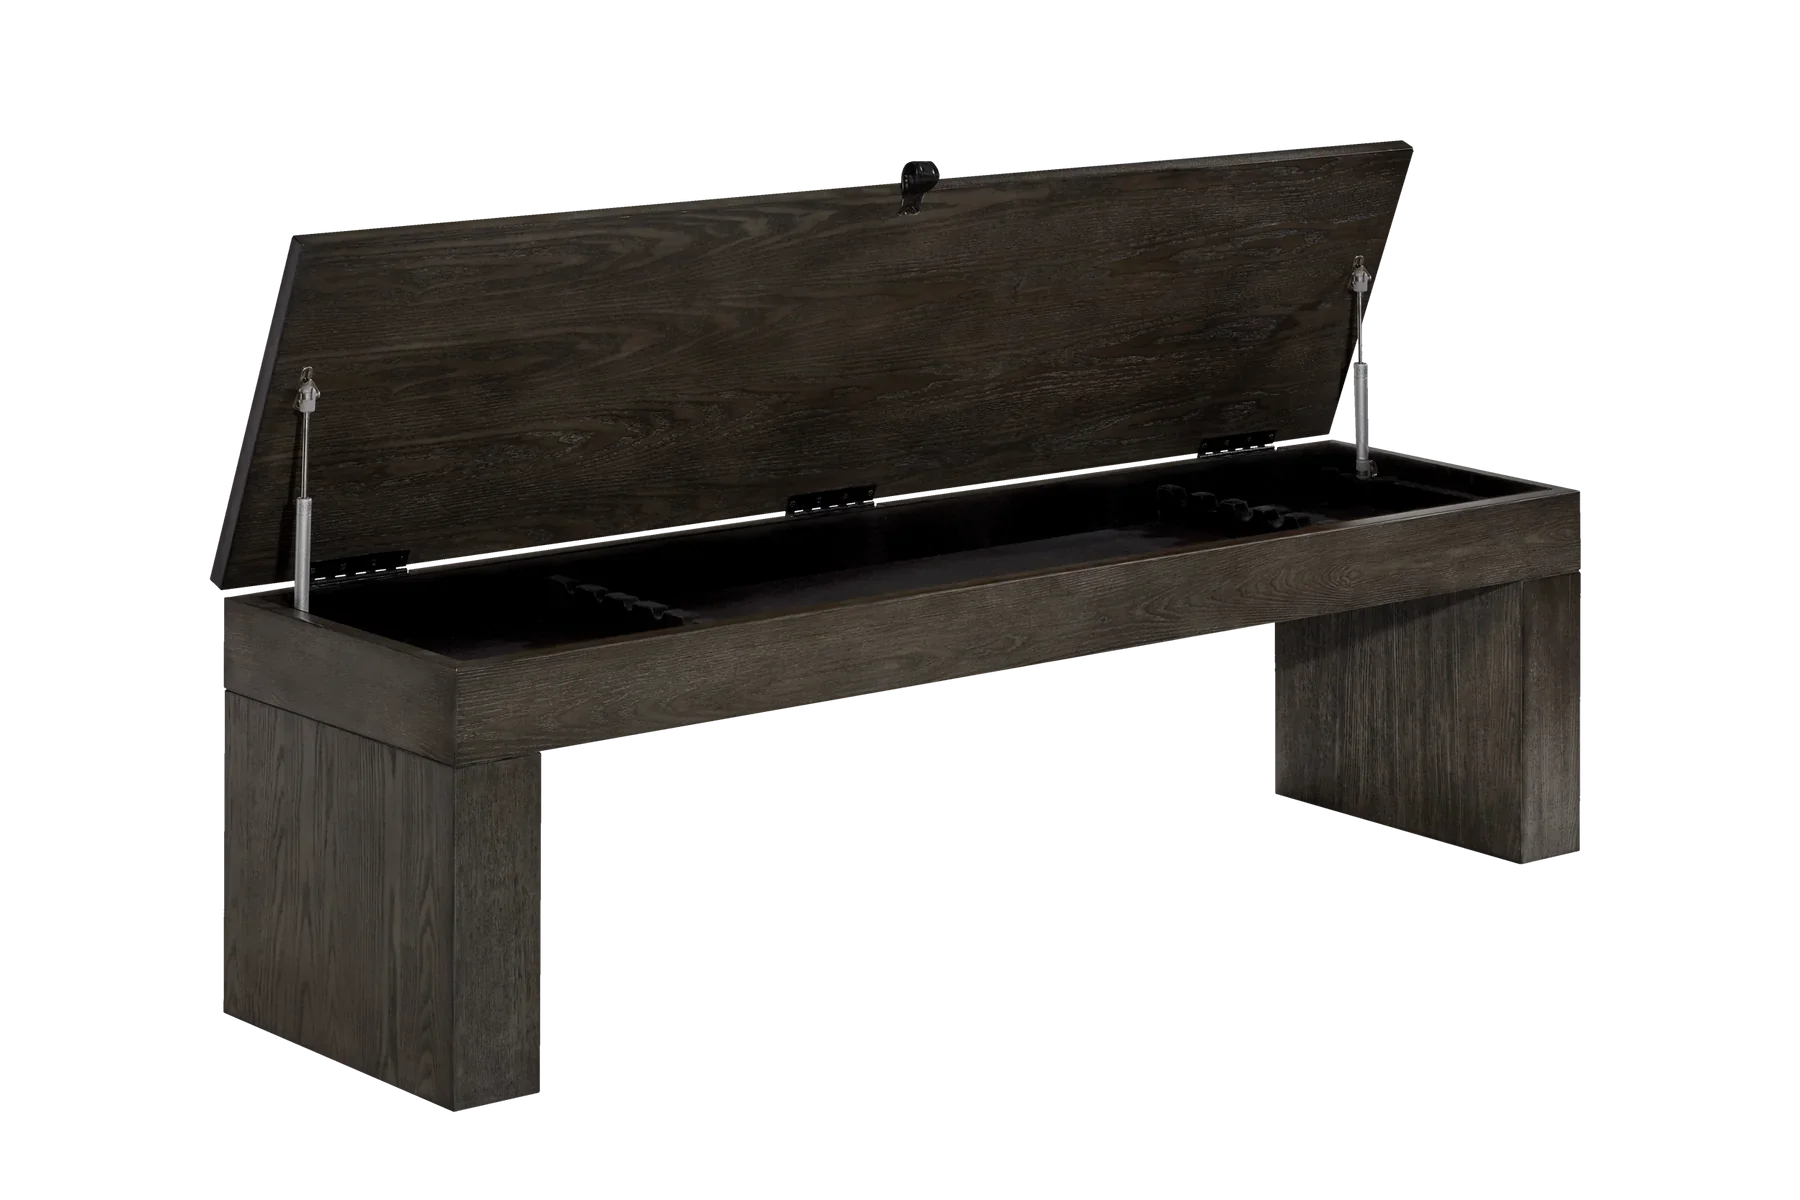 American Heritage Halifax Multi-Functional Storage Bench in Charcoal